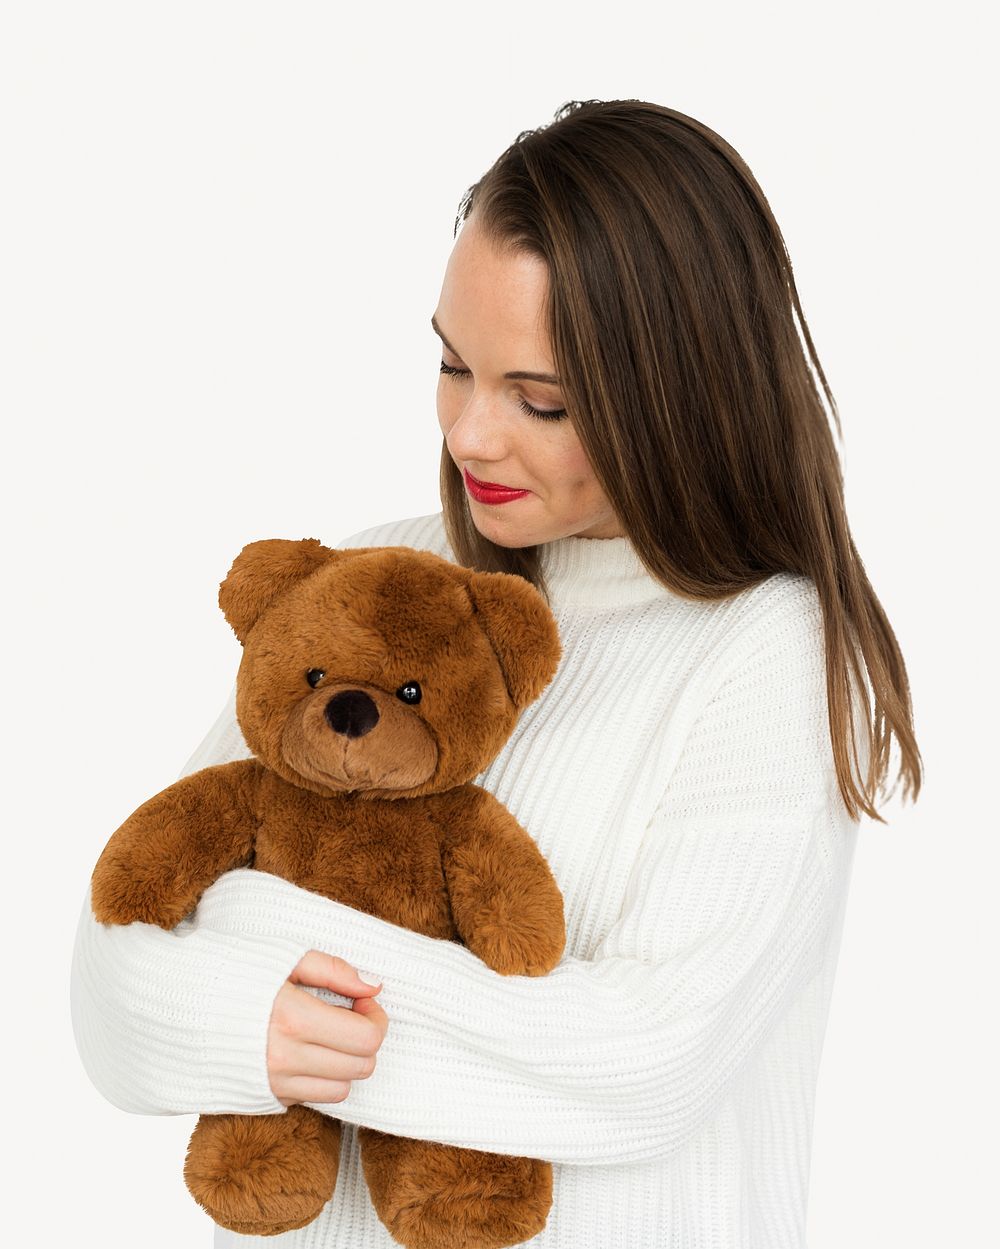 Woman holding teddy, isolated image